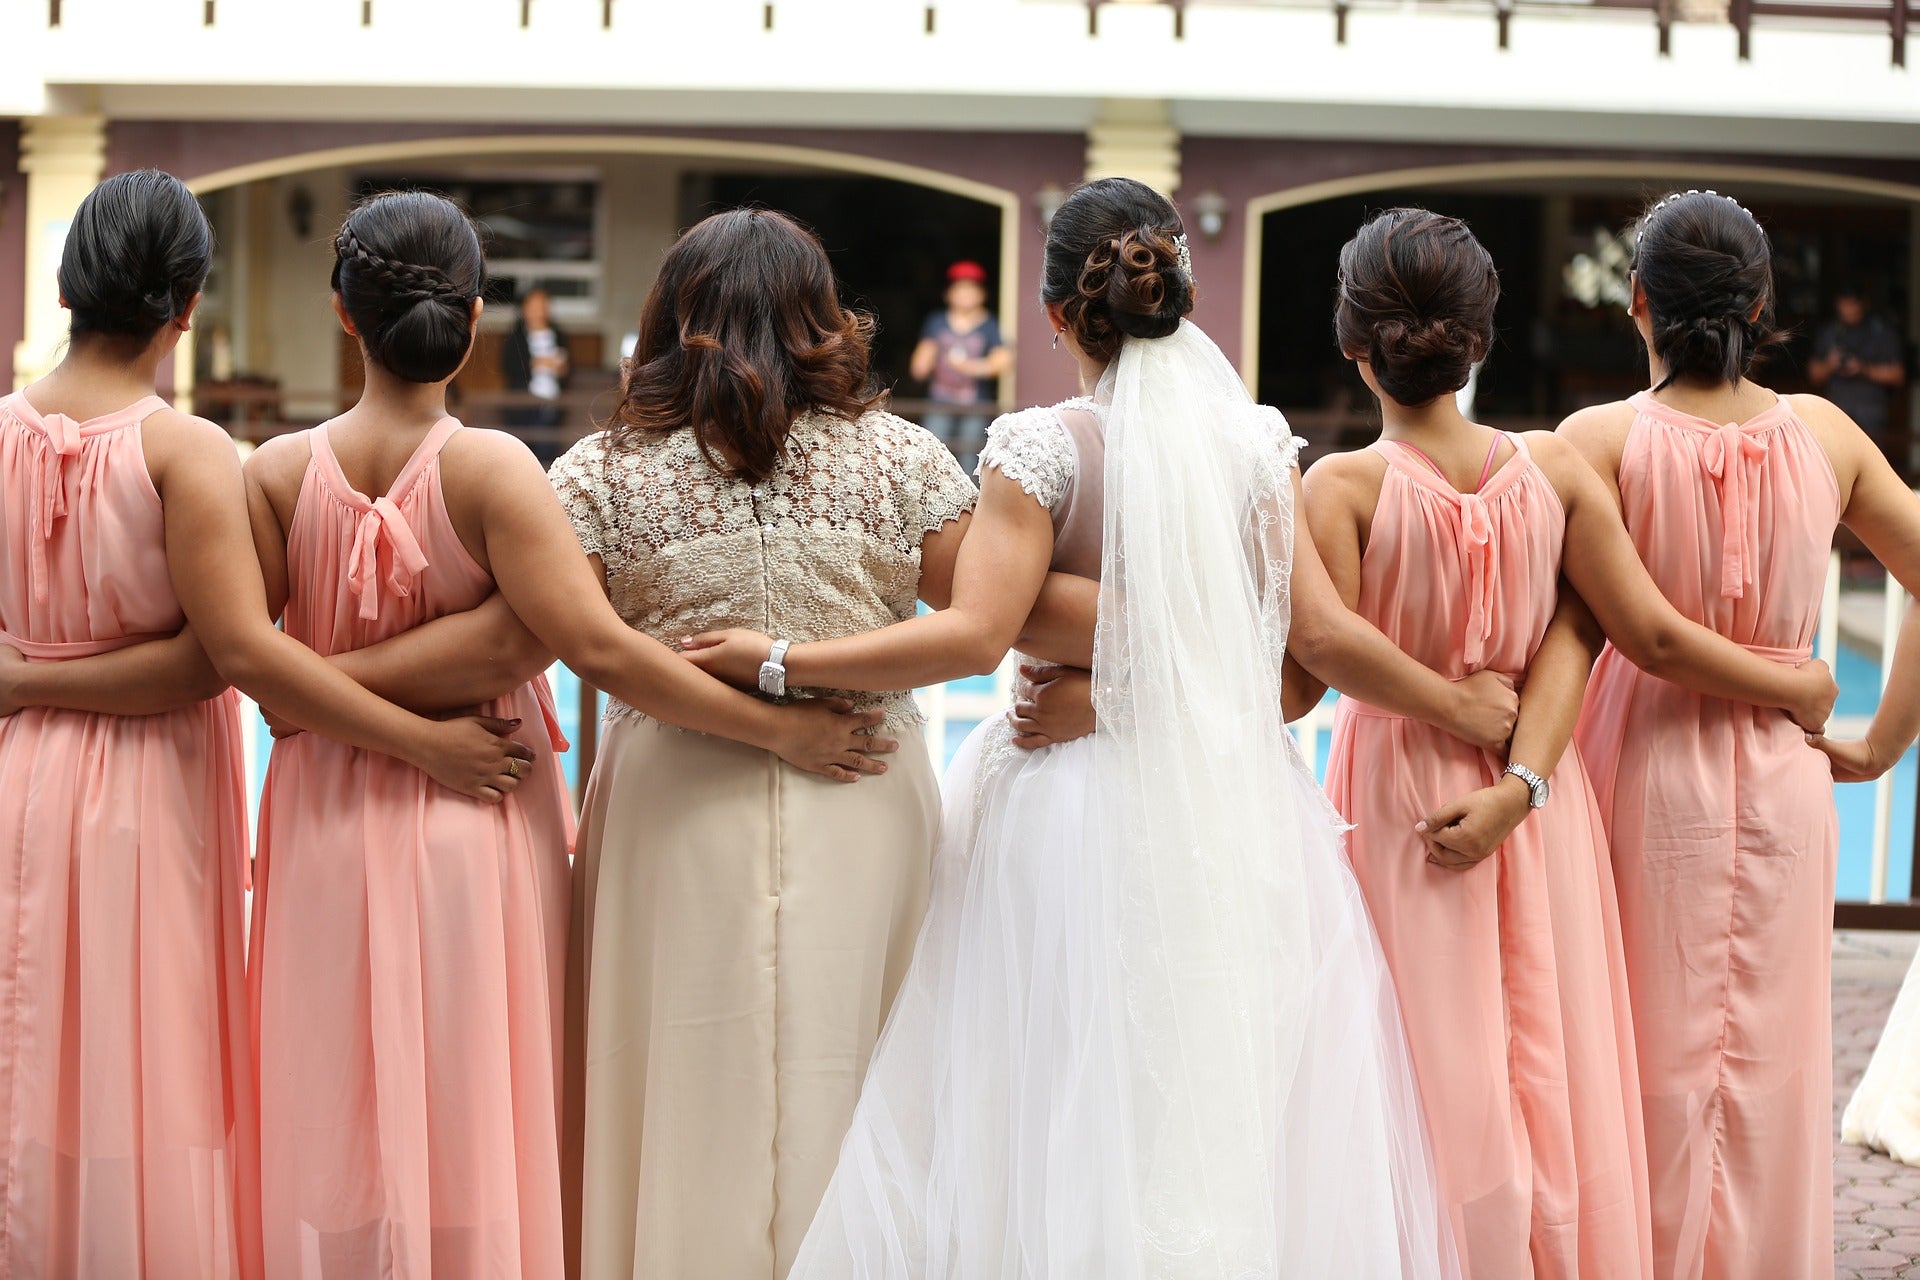 Top 10 Thoughtful Bridesmaid Gift Ideas